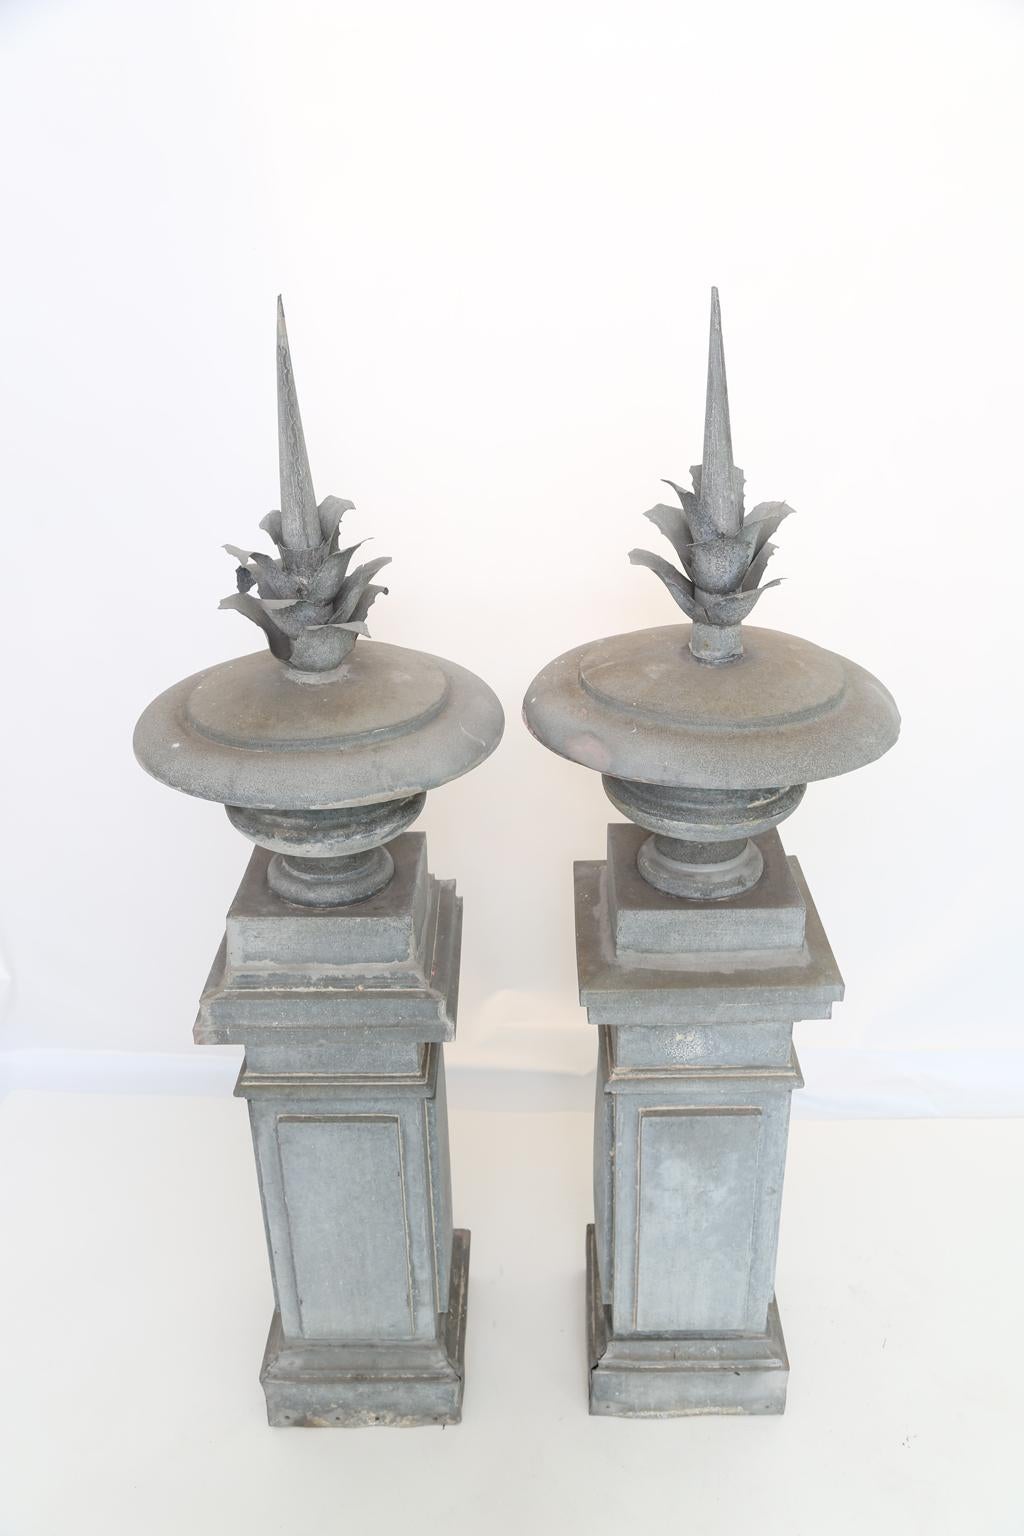 Pair of 19th century architectural finials, of zinc metal building finials, each an exaggerated round urn with stylized foliate spire, on tall, square plinths.

Stock ID: D2603.